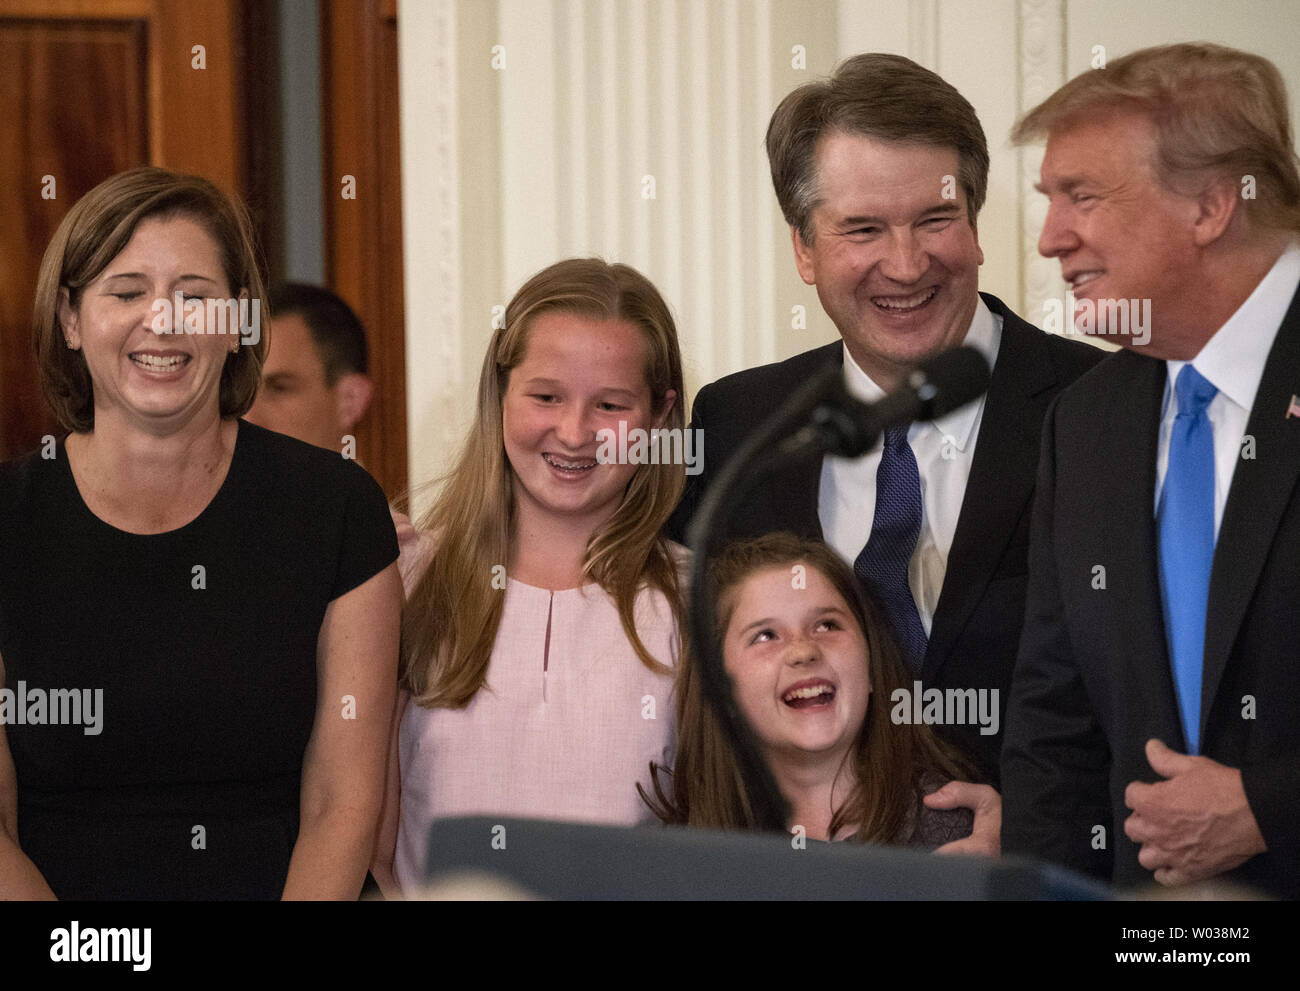 President Donald Trump smiles the the family of Brett Kavanaugh,  his  nominee for Supreme Court Justice, during a ceremony in the East Room at the White House in Washington, D.C., on July 9, 2018. Kavanaugh will be replacing retiring Justice Anthony Kennedy. (L-R) Wife Ashley, daughters Margaret and Liza, stand with Cavanaugh.   Photo by Pat Benic/UPI Stock Photo